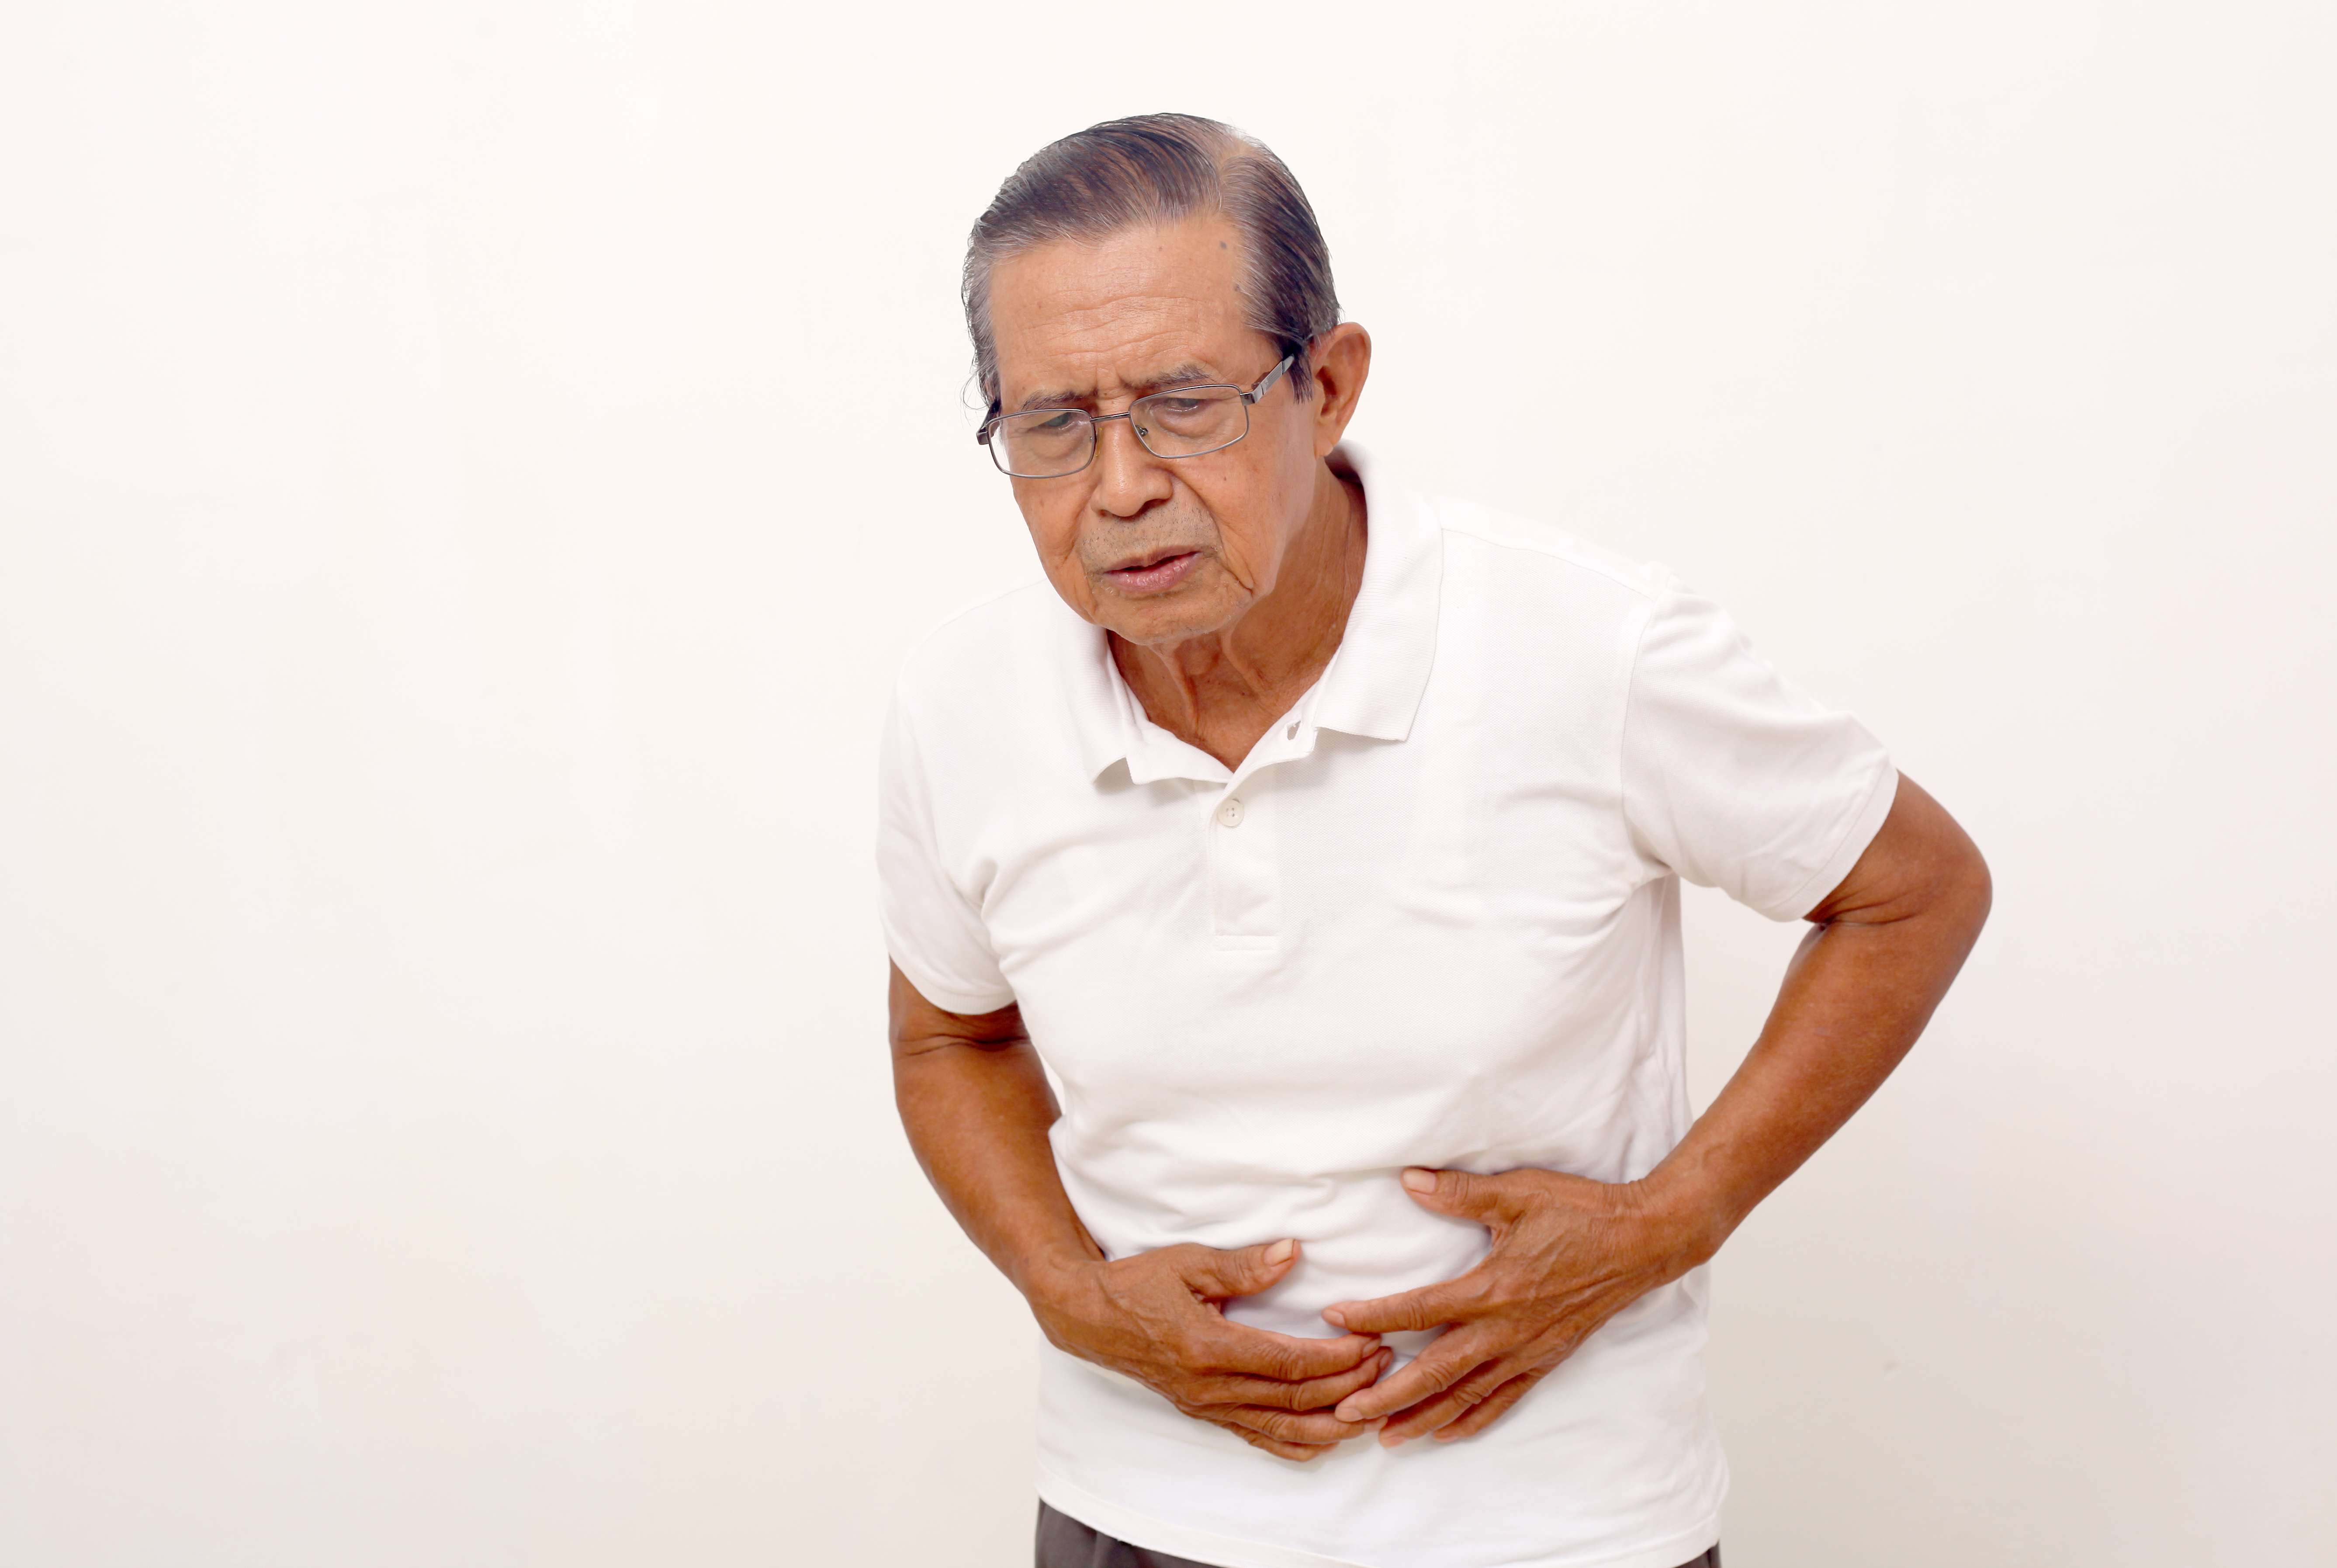 GERD: Symptoms, Causes and Treatment